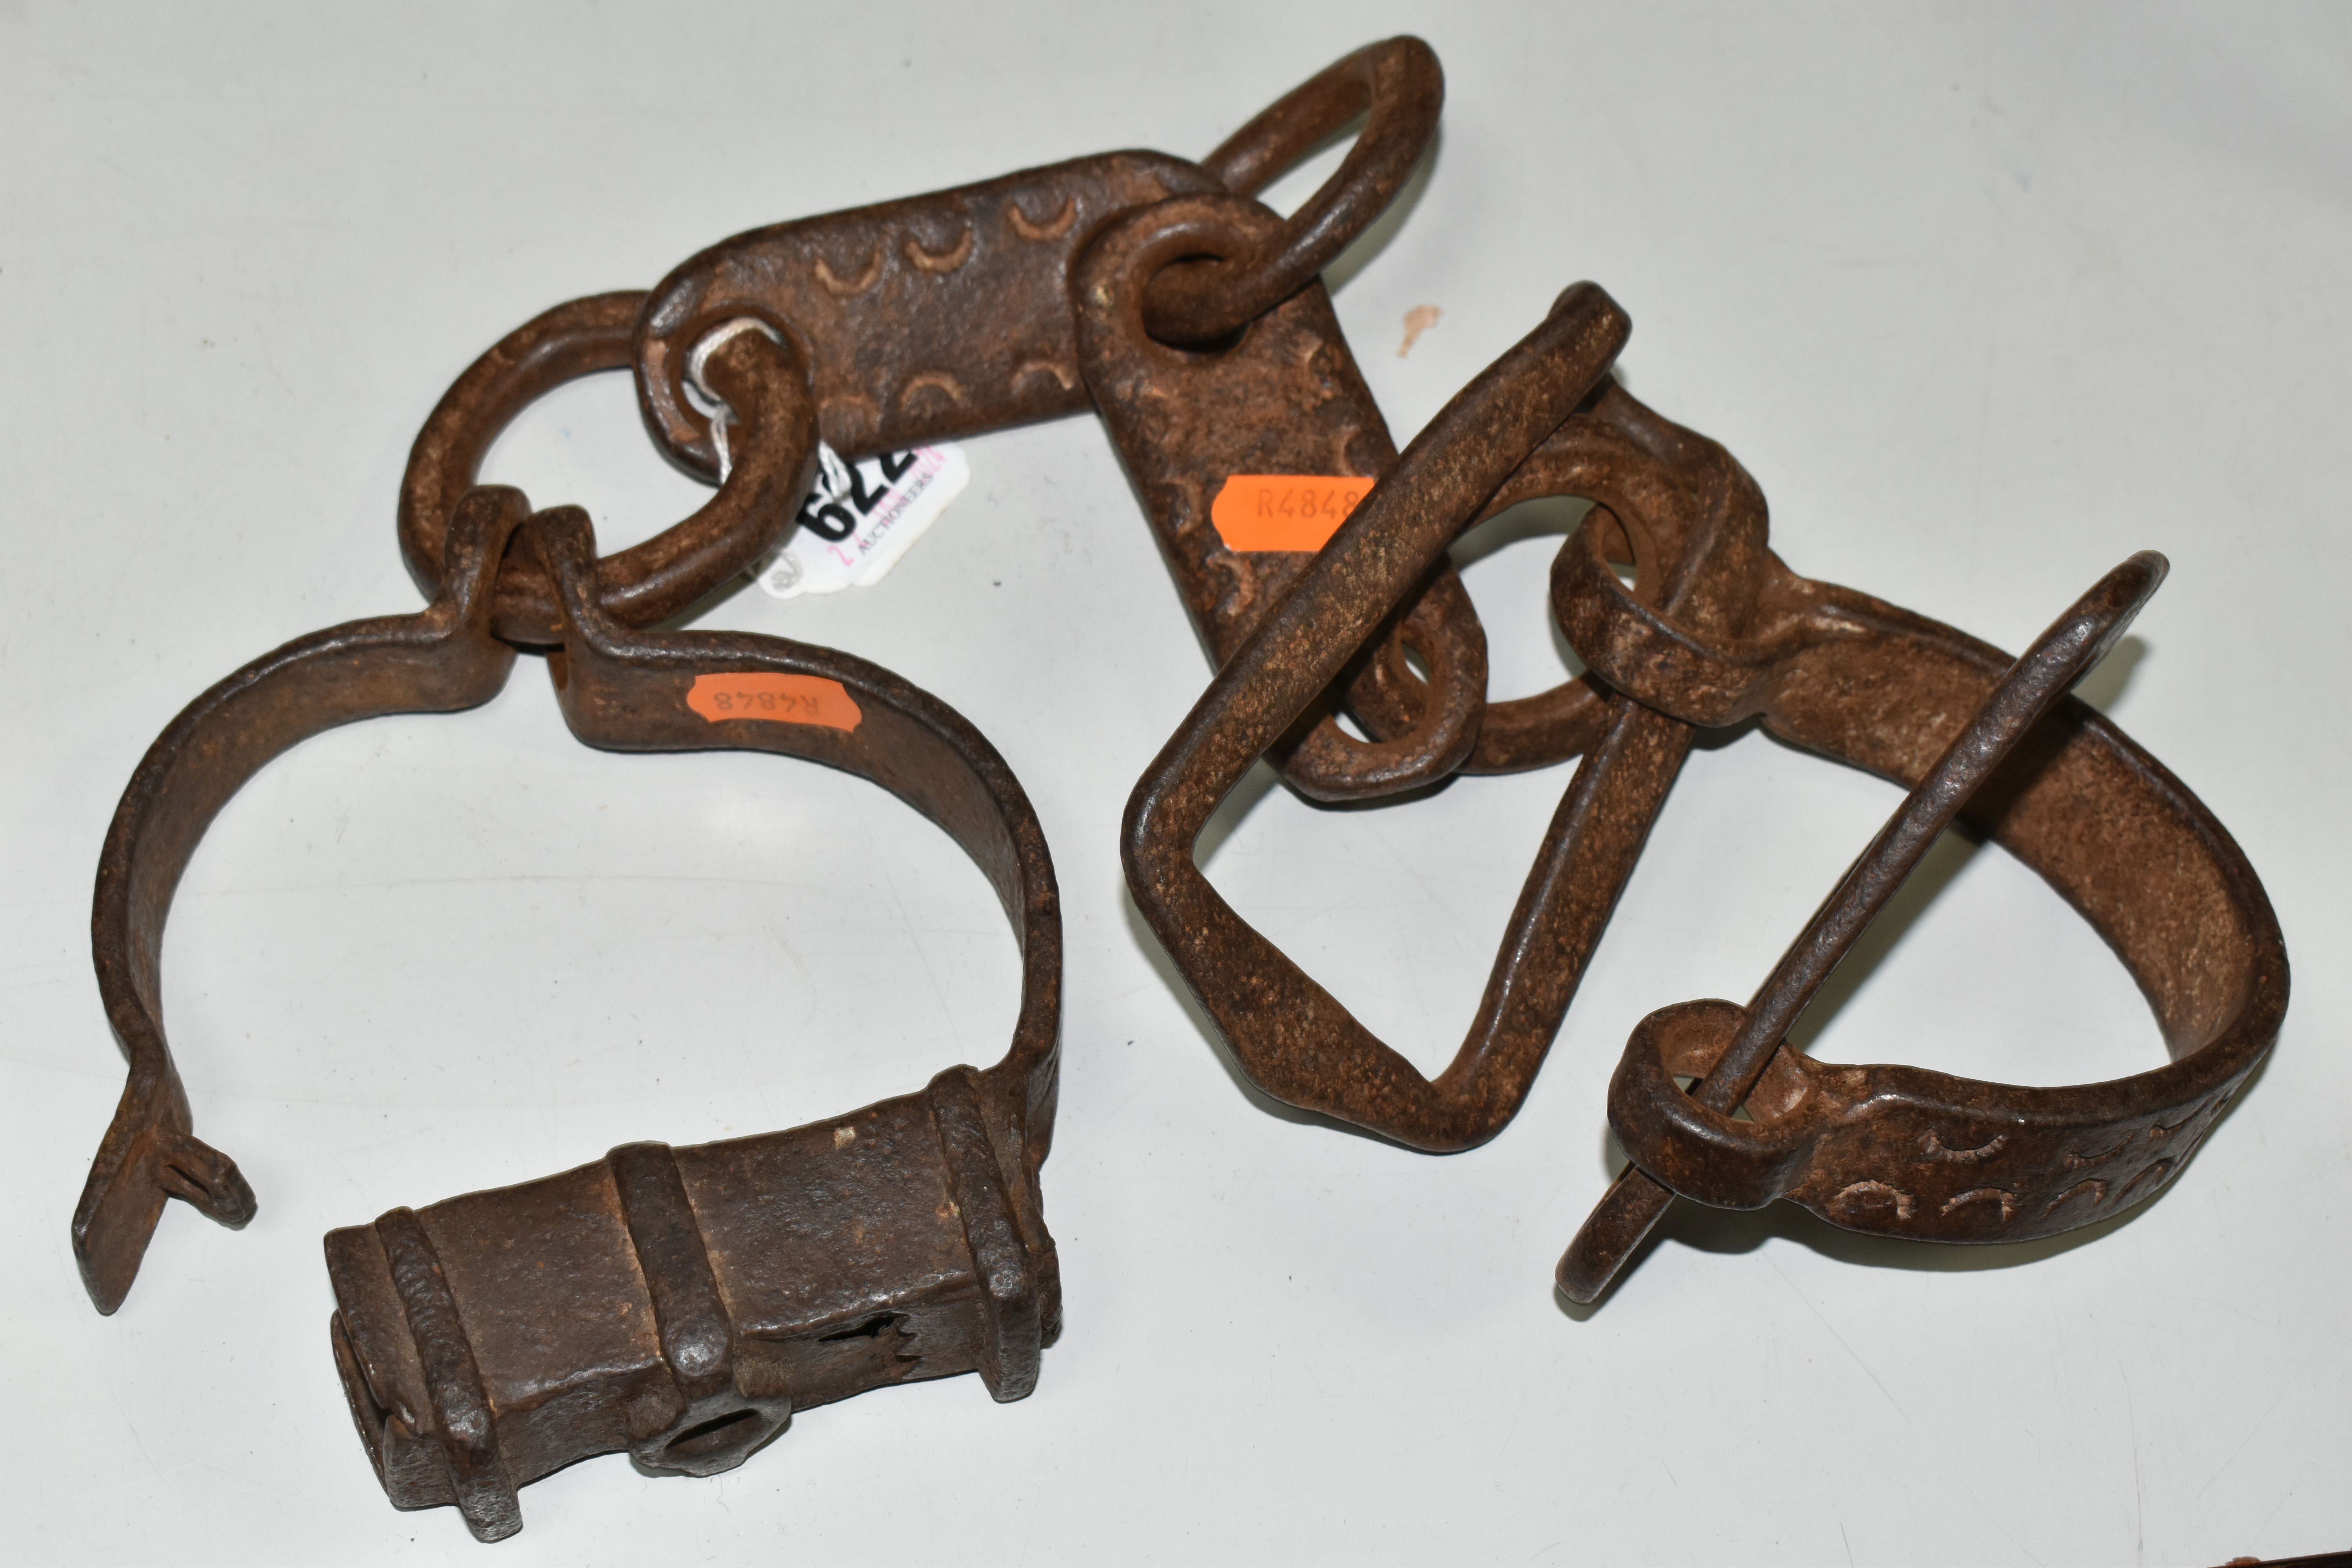 19TH CENTURY WROUGHT IRON SHACKLES, crude decoration to the flat links, lacking lock mechanism and - Image 4 of 4